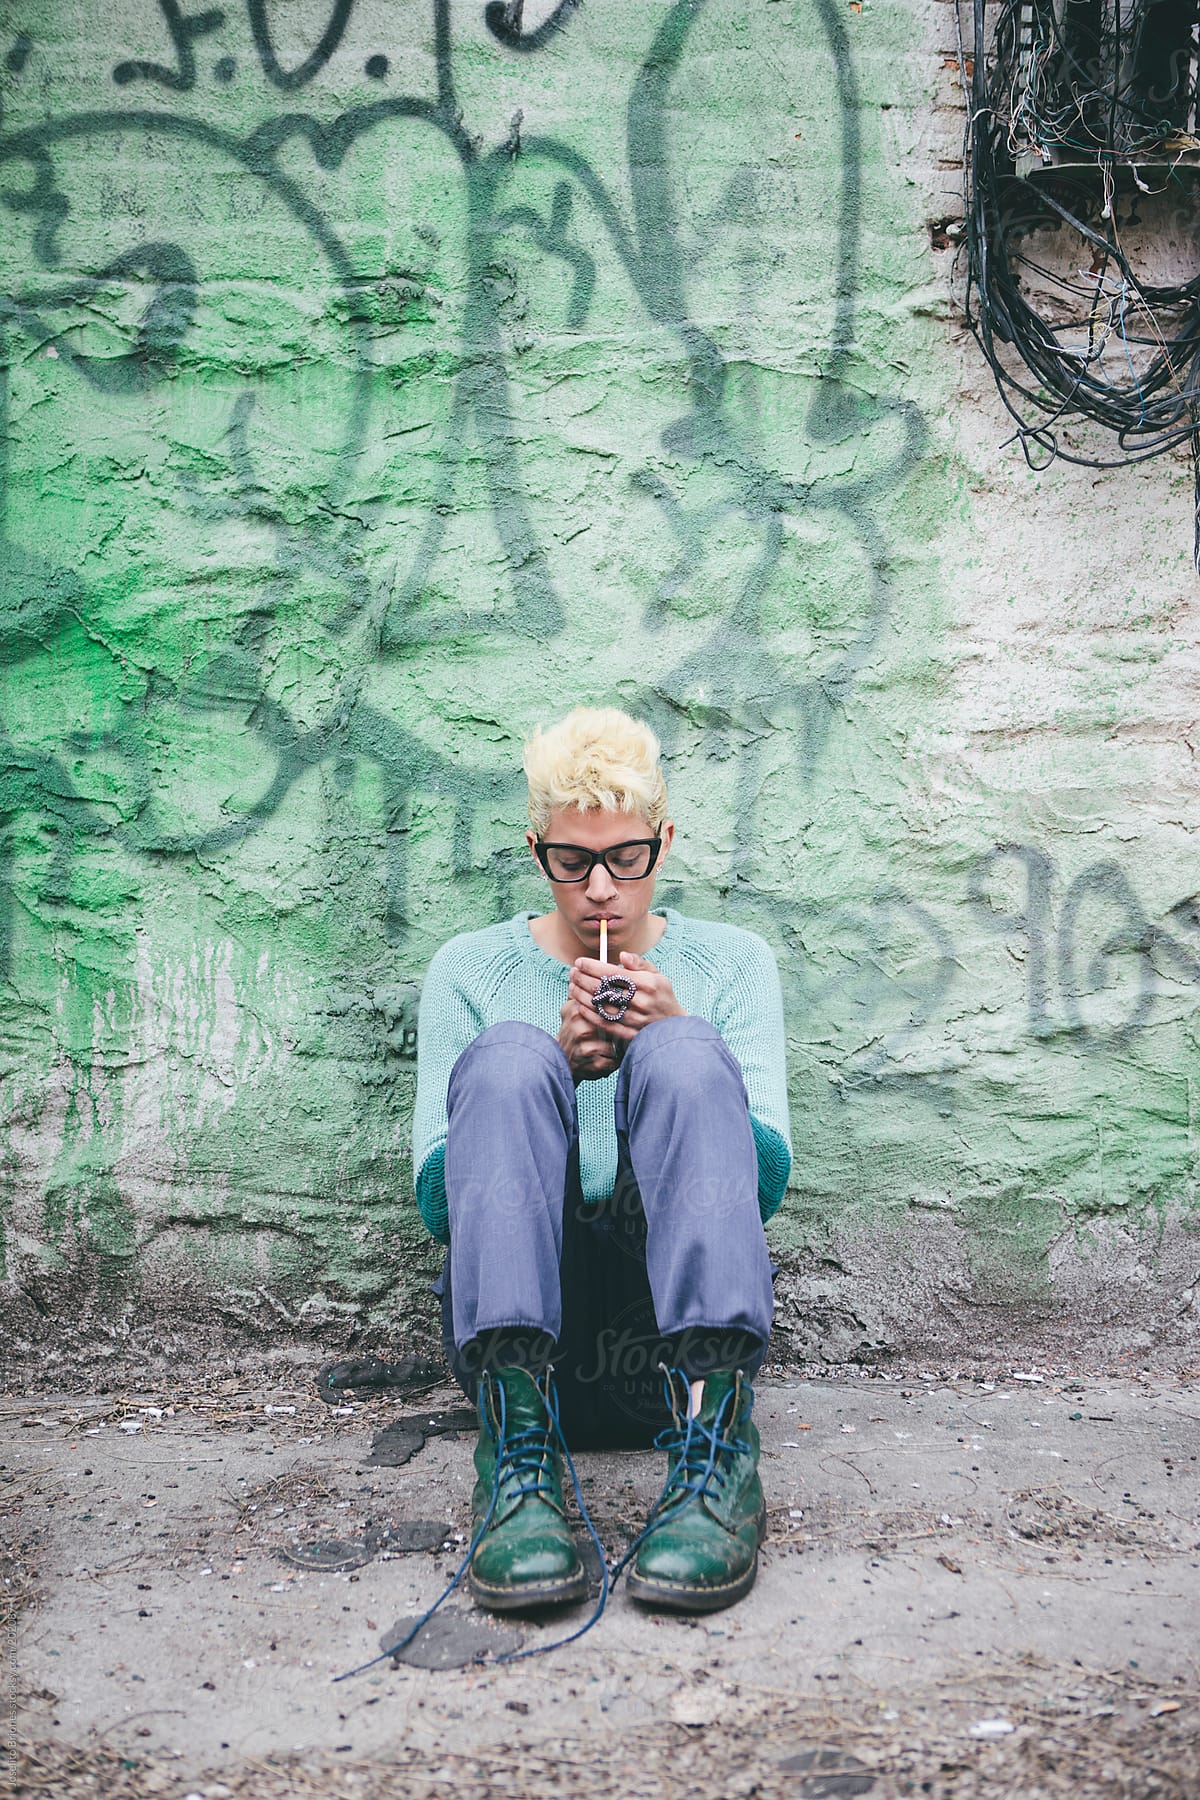 Stylish Young Man with Bleached Blond Hair in Spring and Summer Fashion Hiding in a Backyard while Smoking a Cigarette